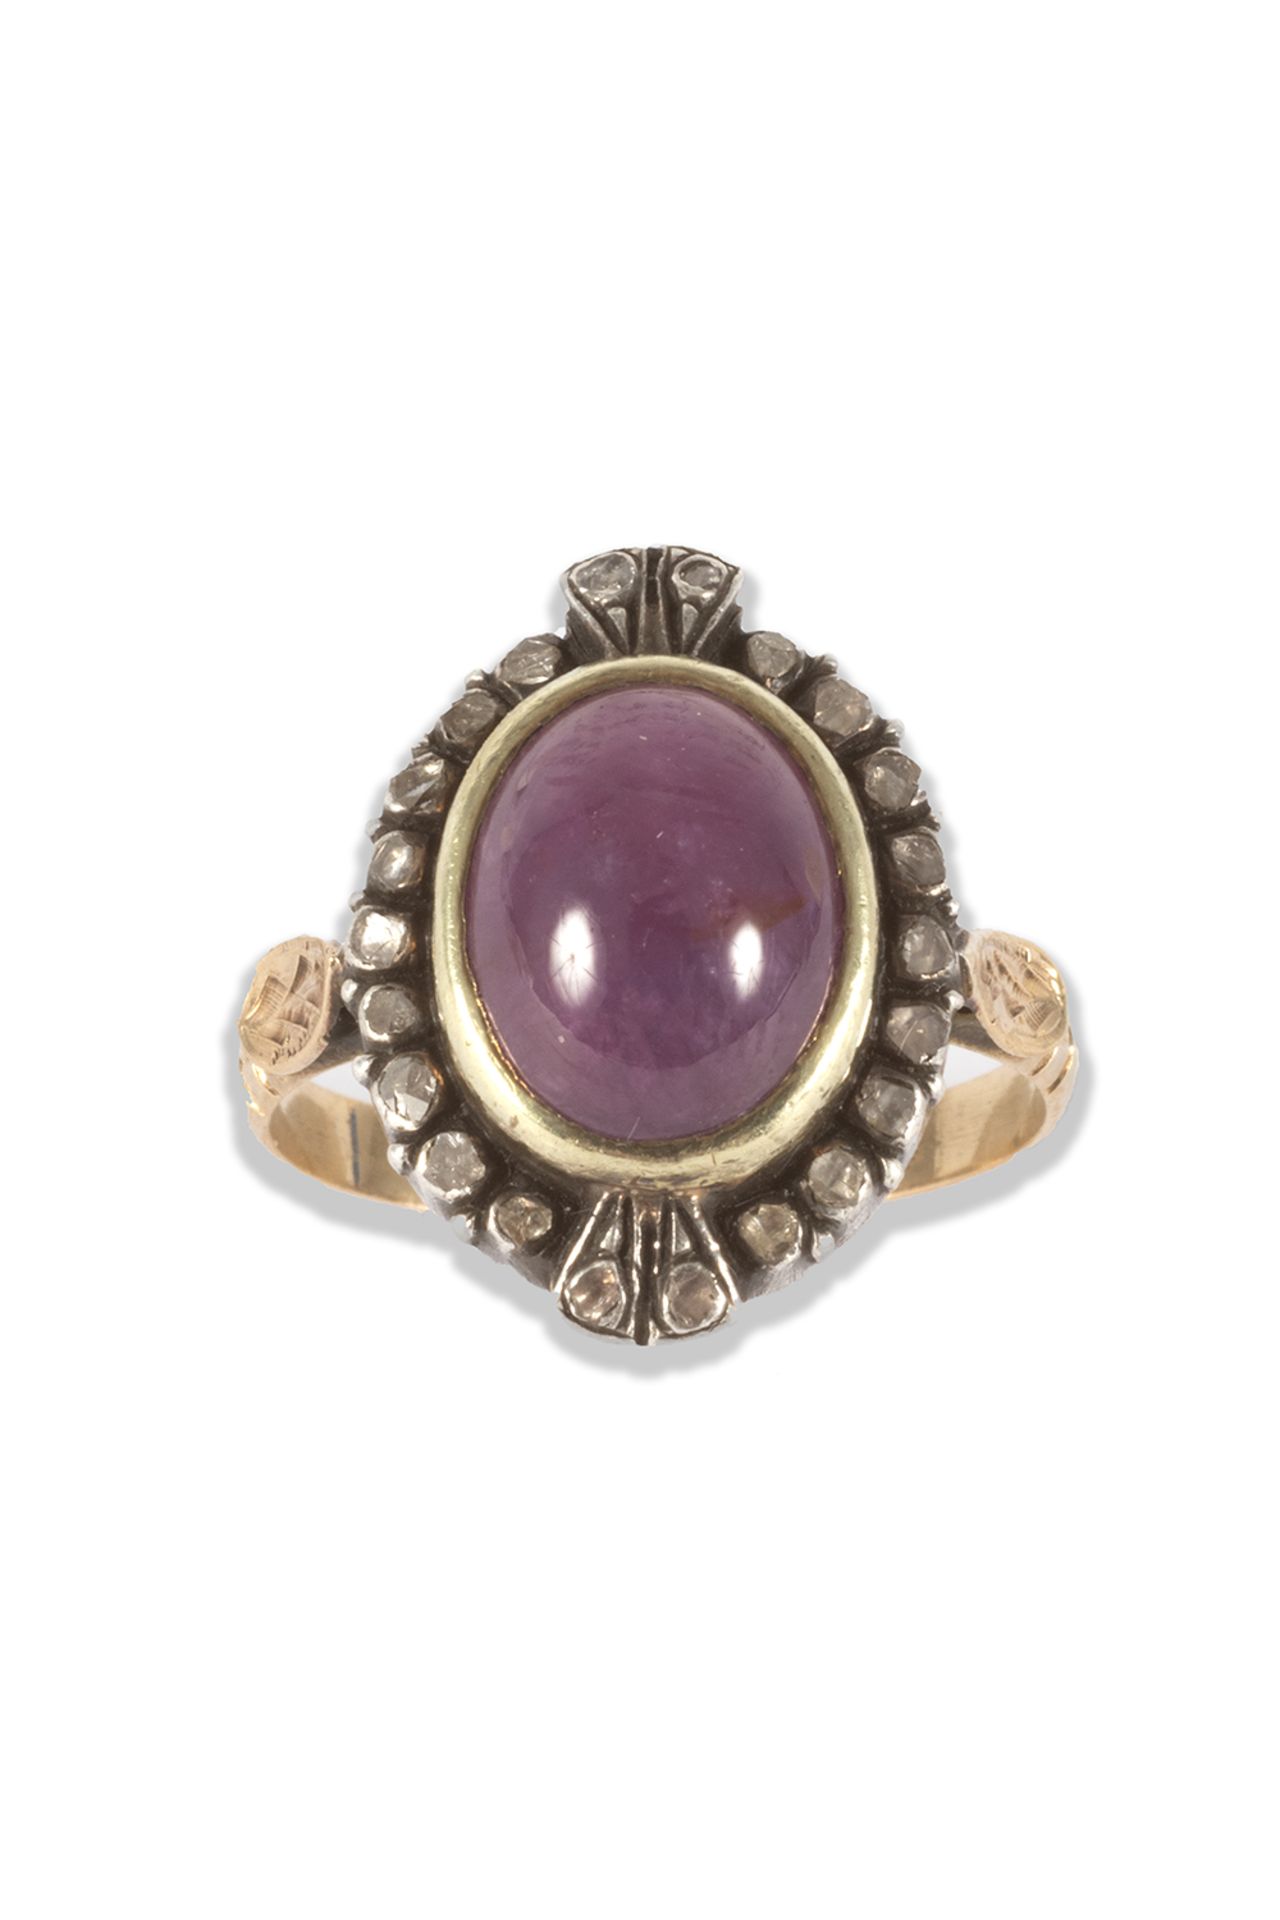 Ring in gold, silver, oval cabochon cut ruby and table cut diamond.